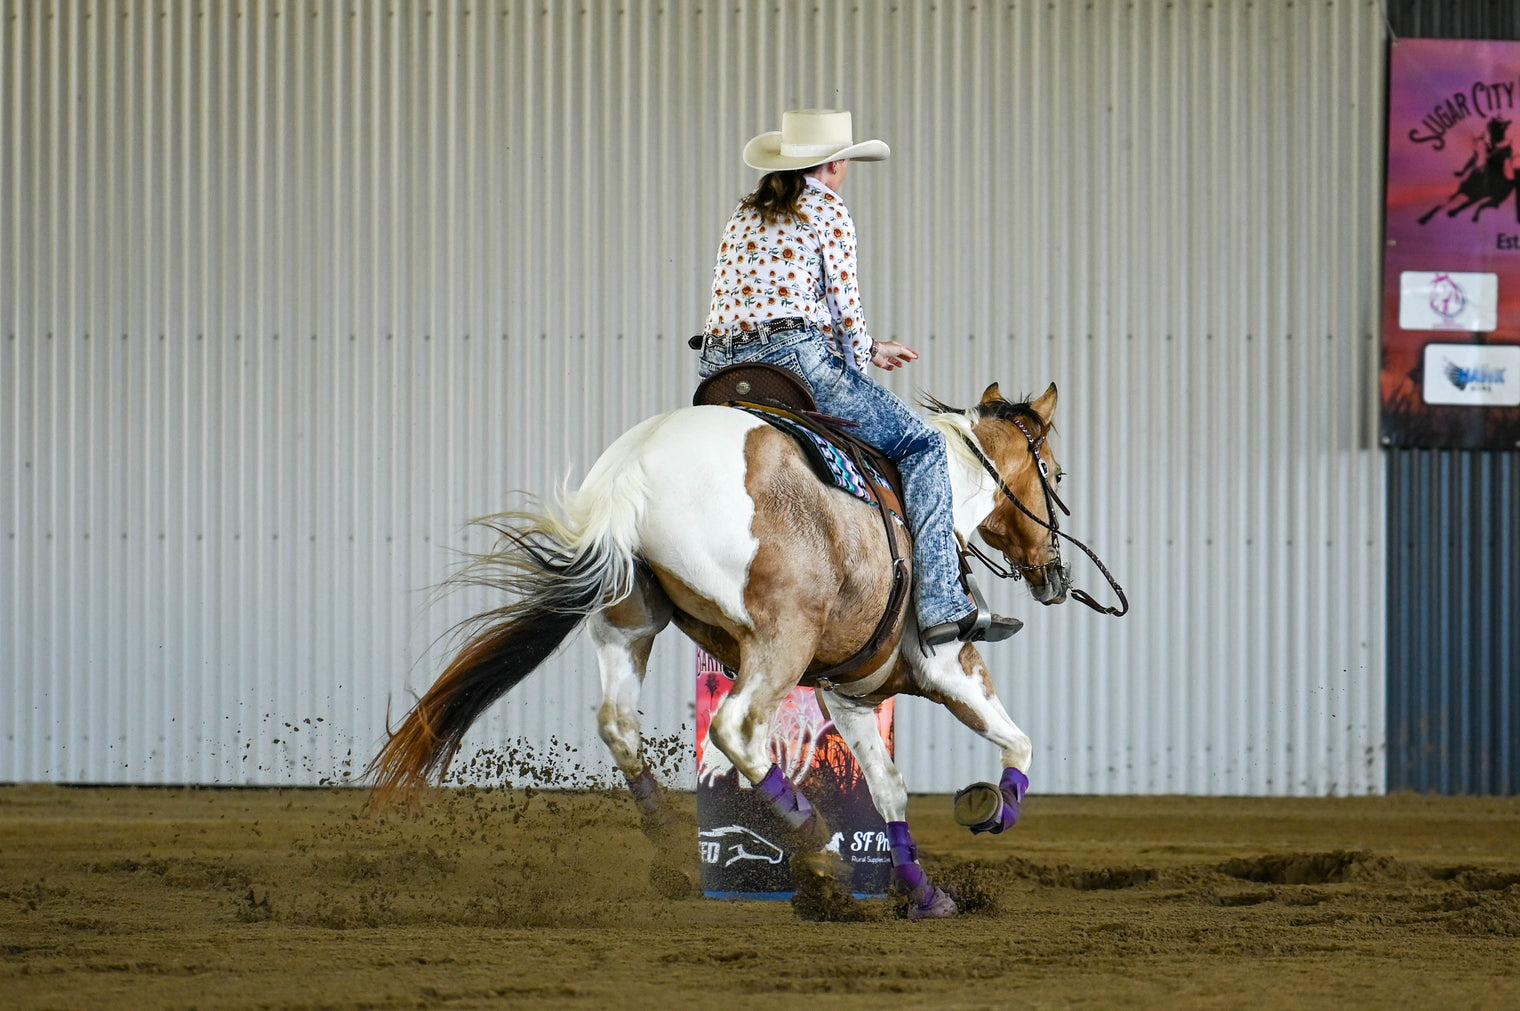 Saddle Up and Learn the Difference Between Split and Barrel Reins for Barrel Racing!